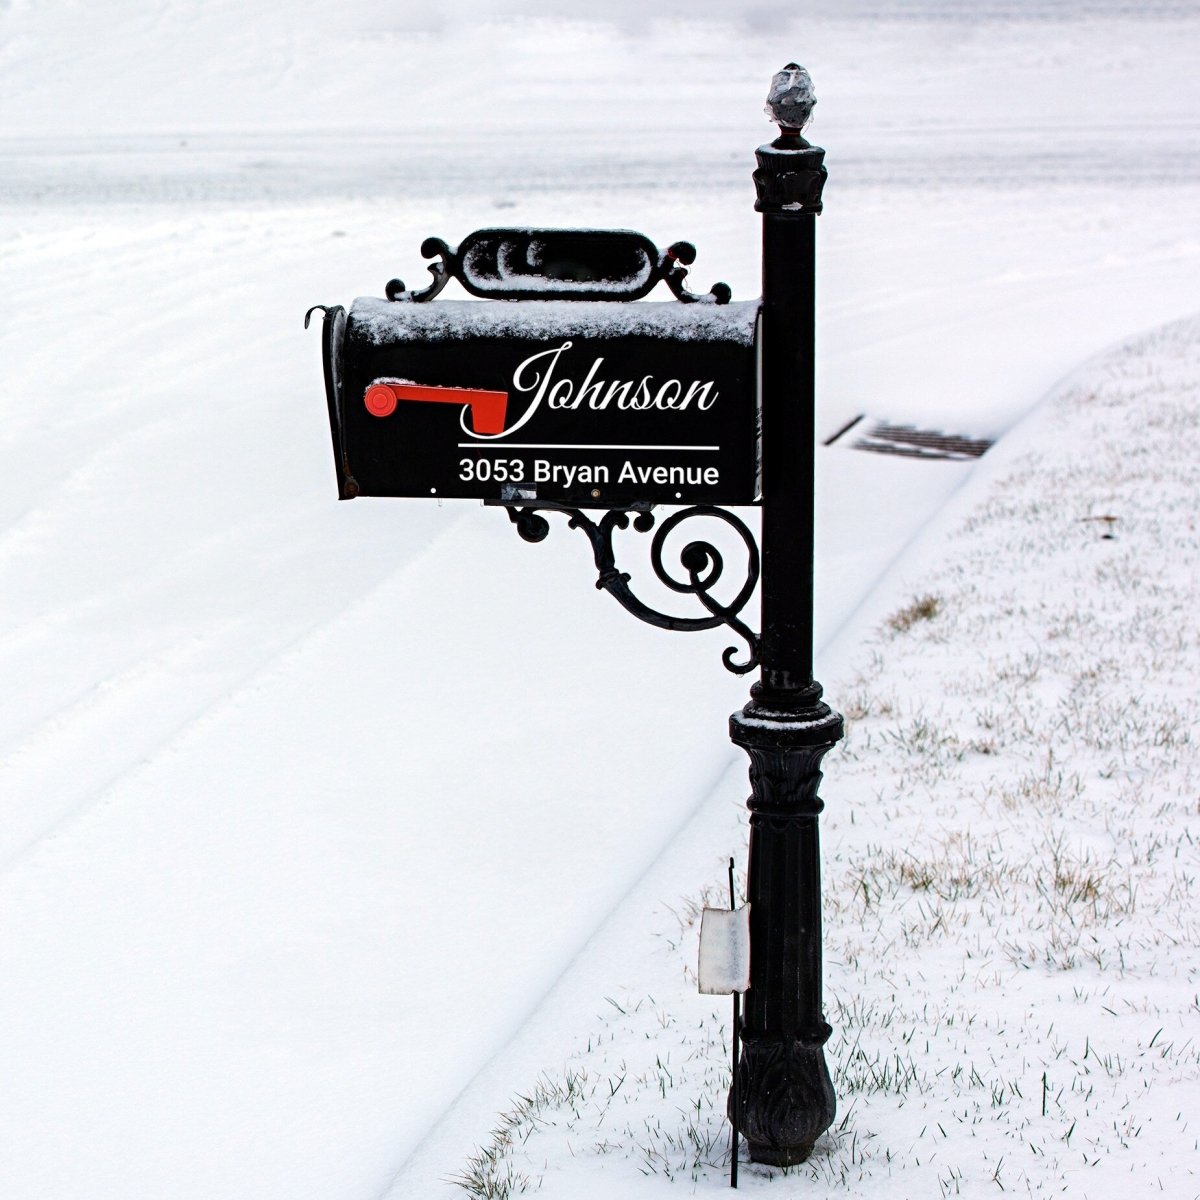 Customized Reflective Mailbox Decal - Personalized Vinyl Sticker for Enhanced Visibility - Decords